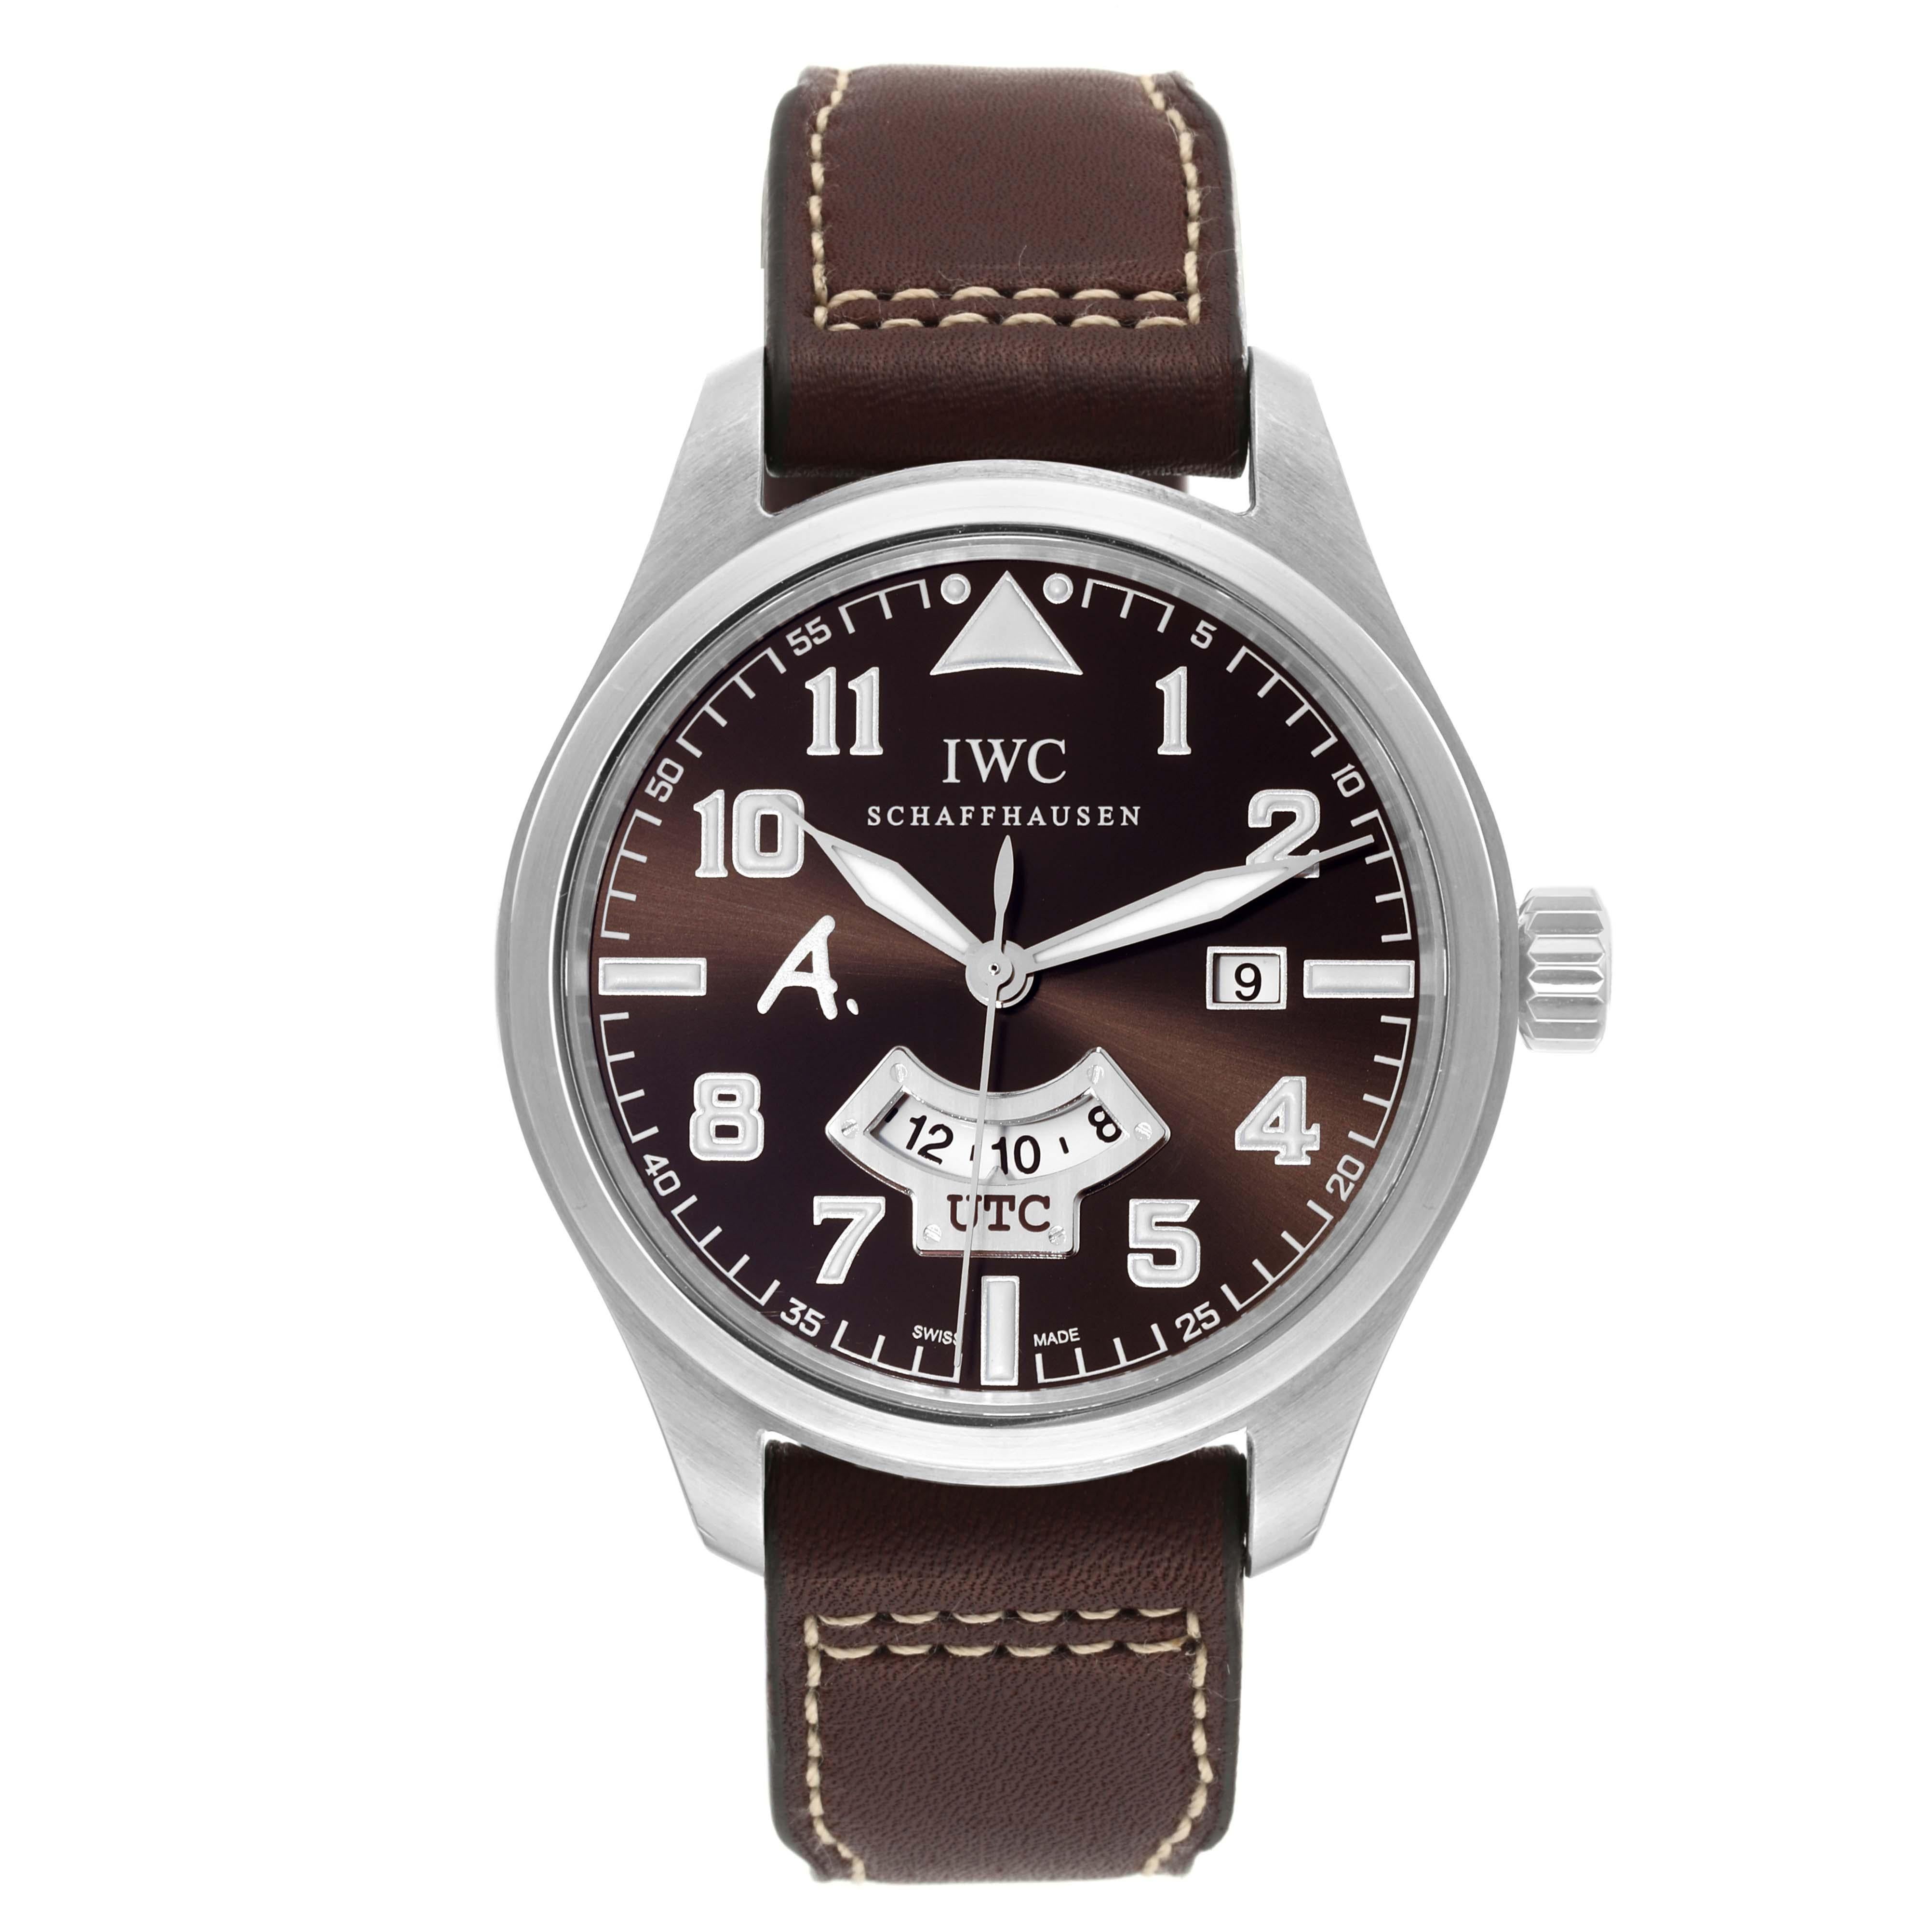 IWC Pilot UTC Antoine de Saint Exupery Limited Edition Steel Mens Watch IW326104 Box Card. Automatic self-winding movement. Stainless steel case 44.0 mm in diameter. Stainless steel bezel. Scratch resistant sapphire crystal. Brown dial with